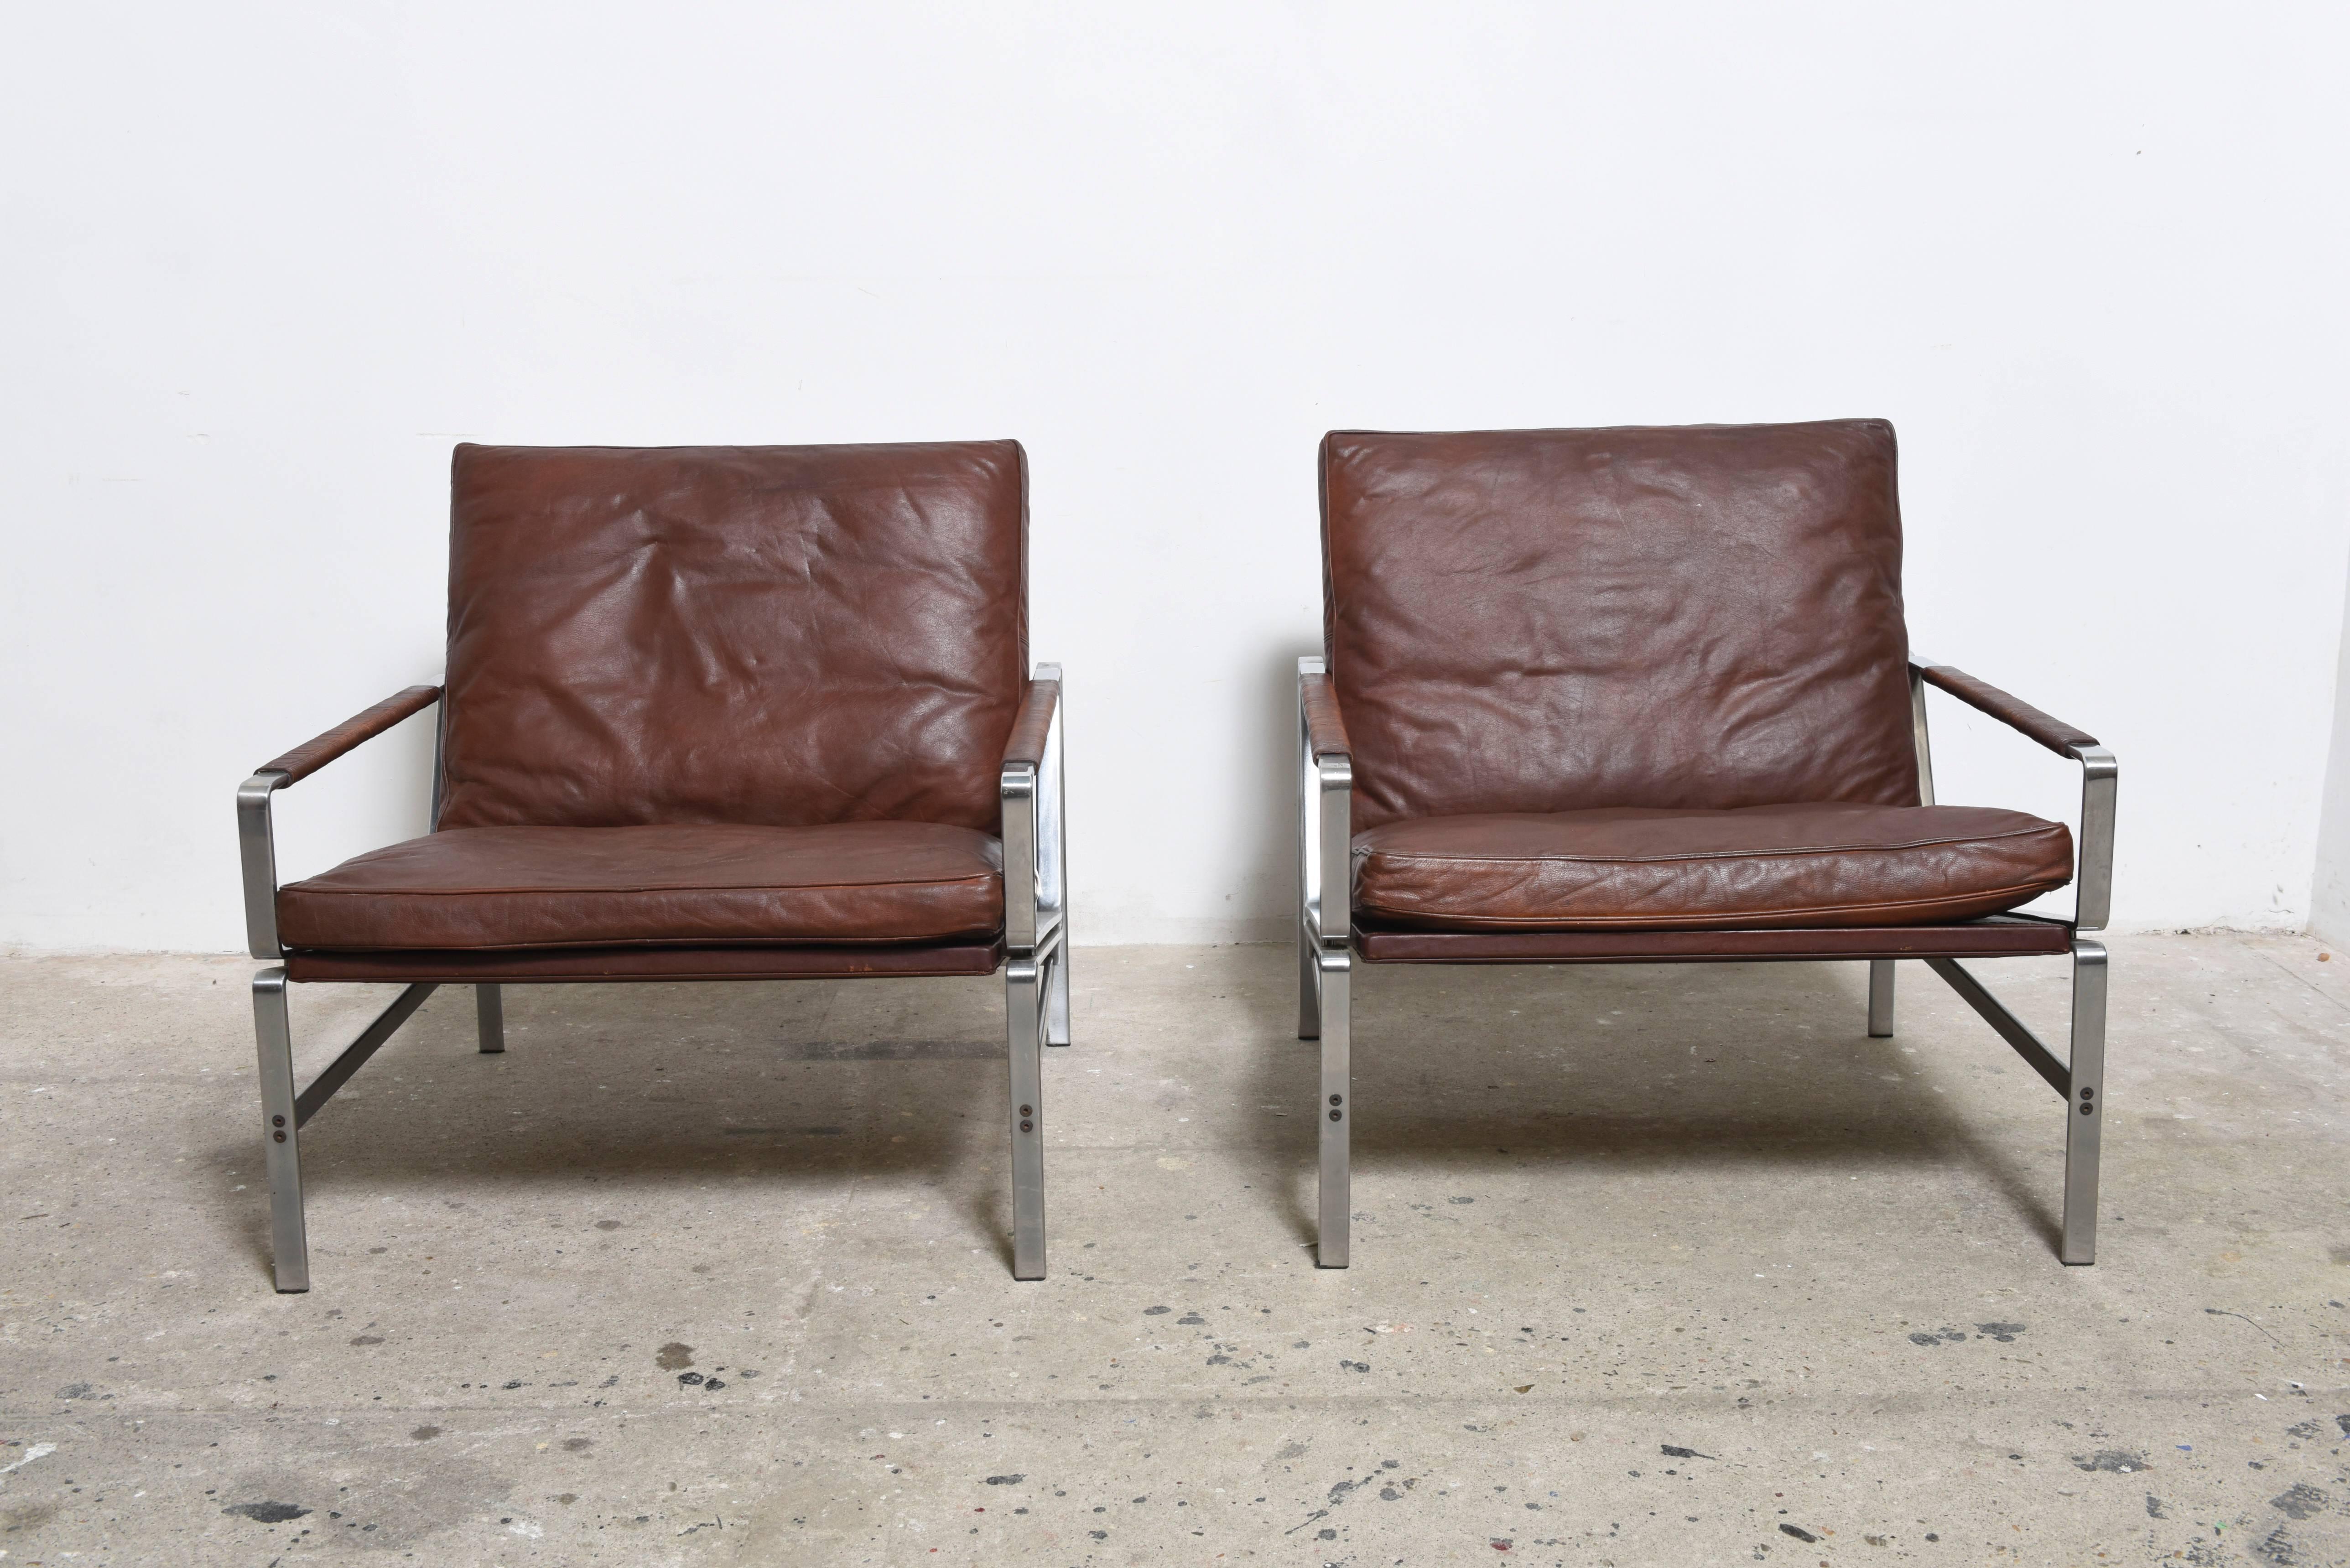 Set of two armchairs, model 6720 by Preben Fabricius & Jorgen Kastholm by Kill International.

These chairs are one of the finest examples to be found, leather comes in remarkable thick and good original condition with signs of use.

Got a